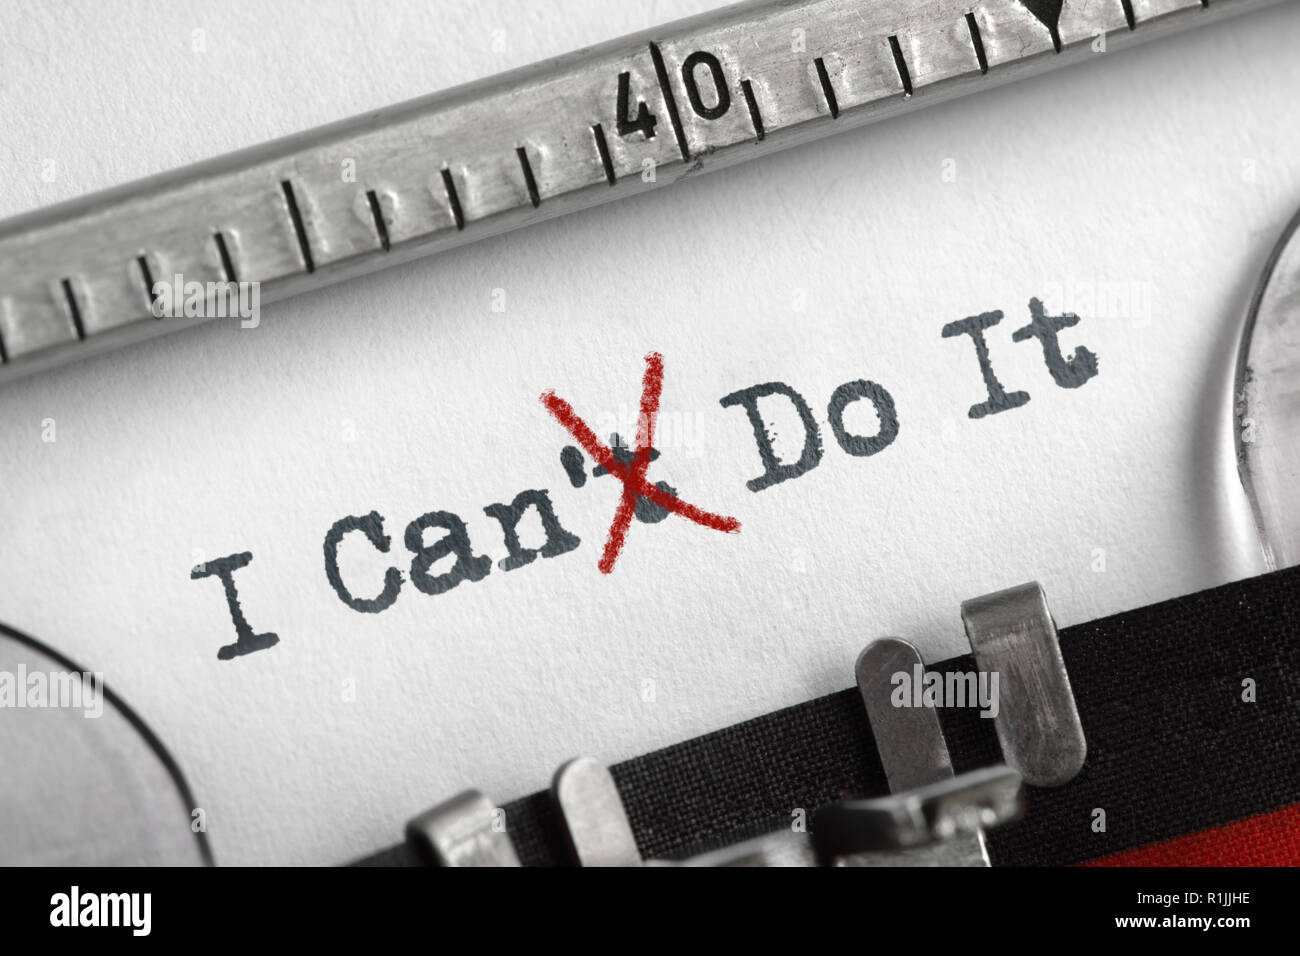 Can't crossed out to read I can do it concept for self belief, positive attitude and  motivation written on an old typewriter Stock Photo